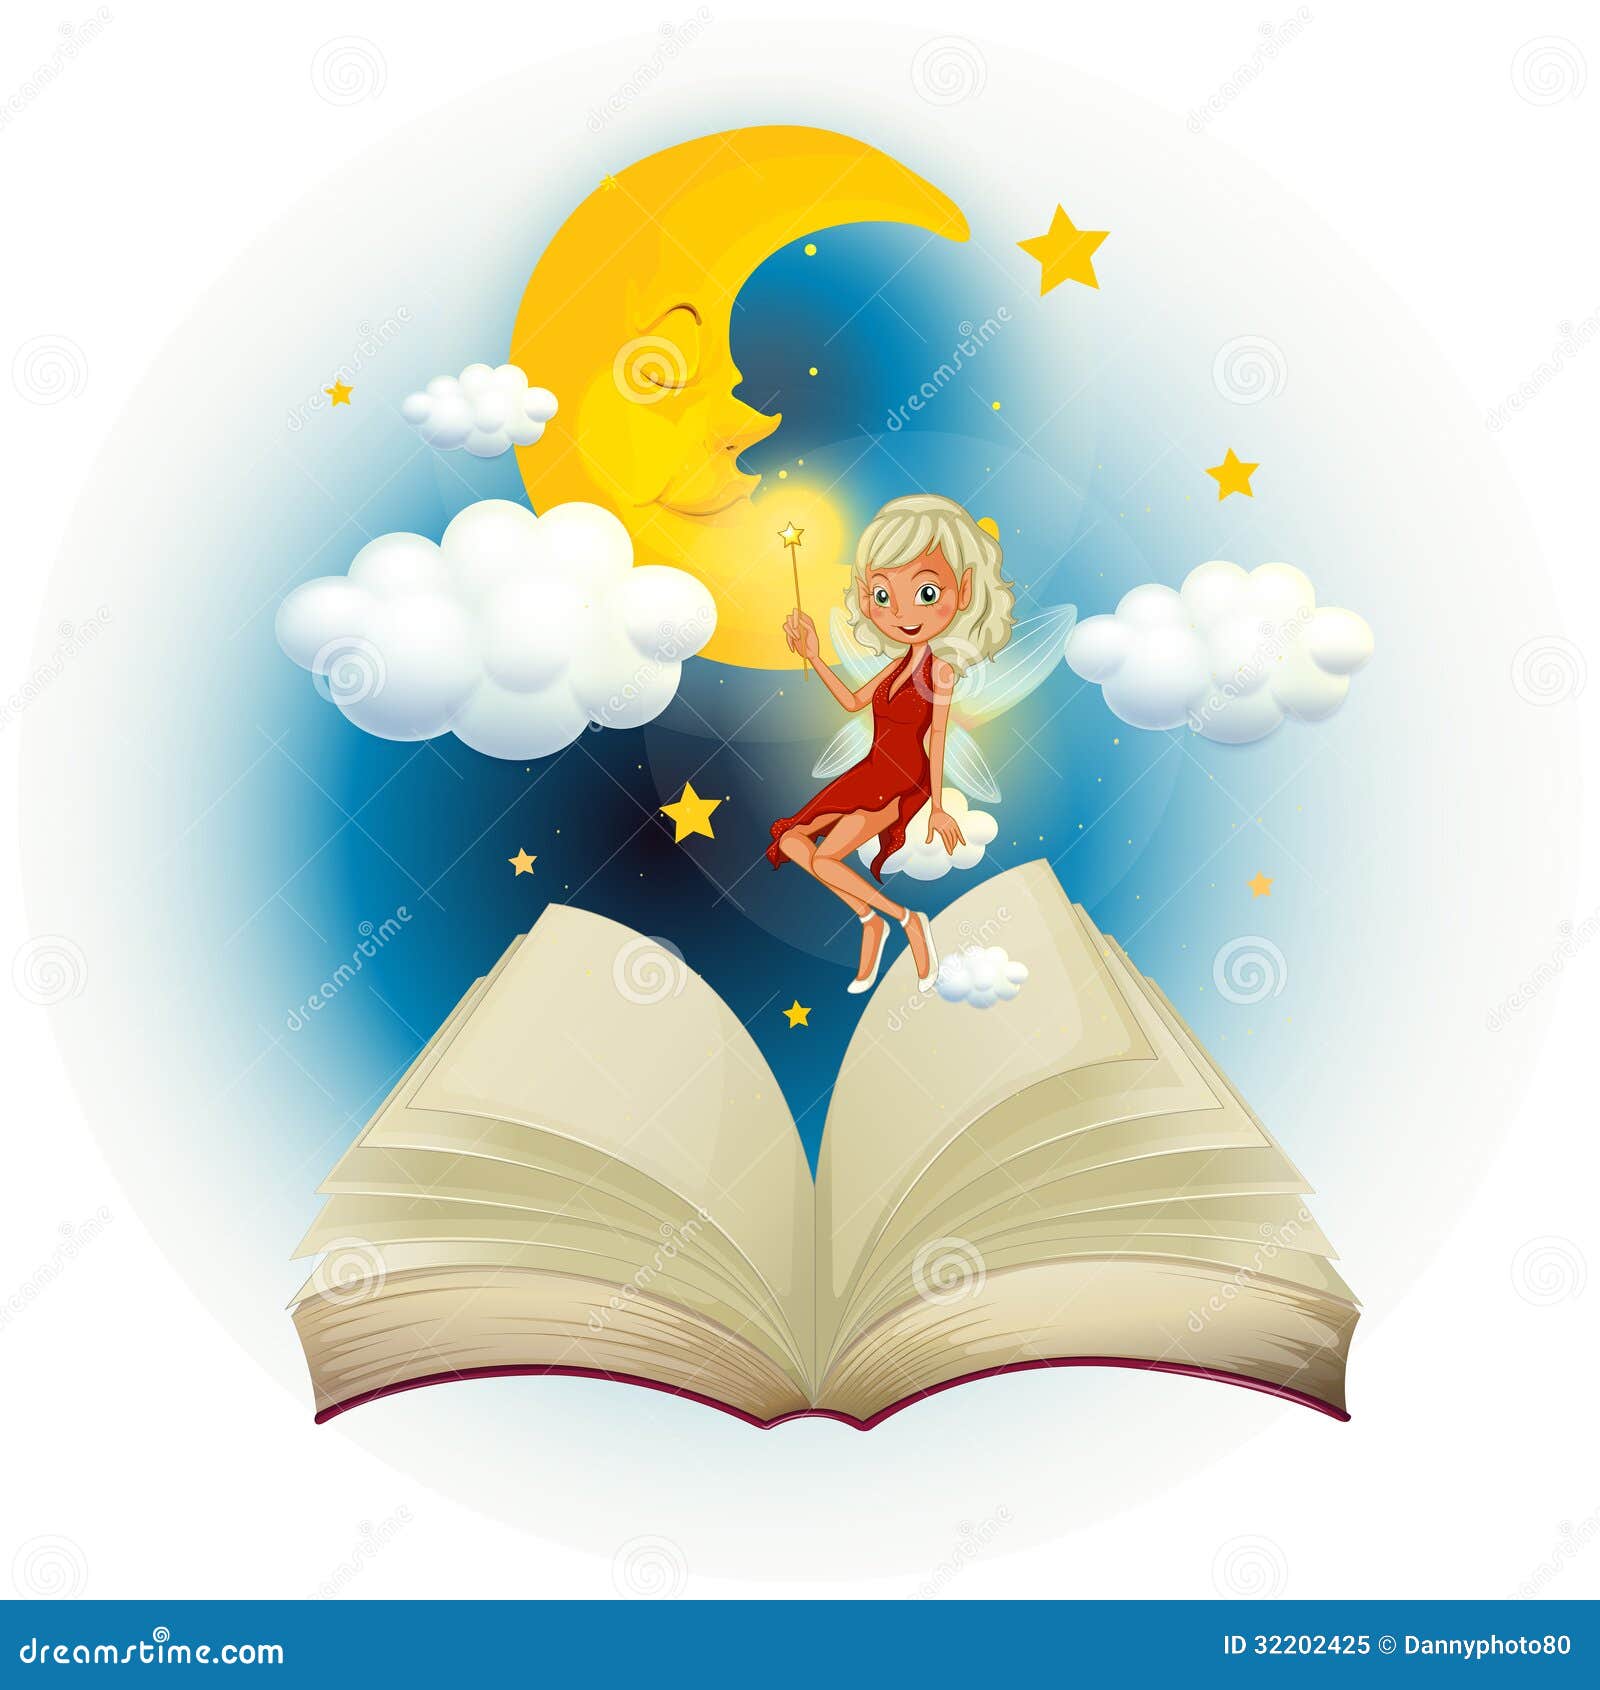 clipart pictures storybook - photo #36